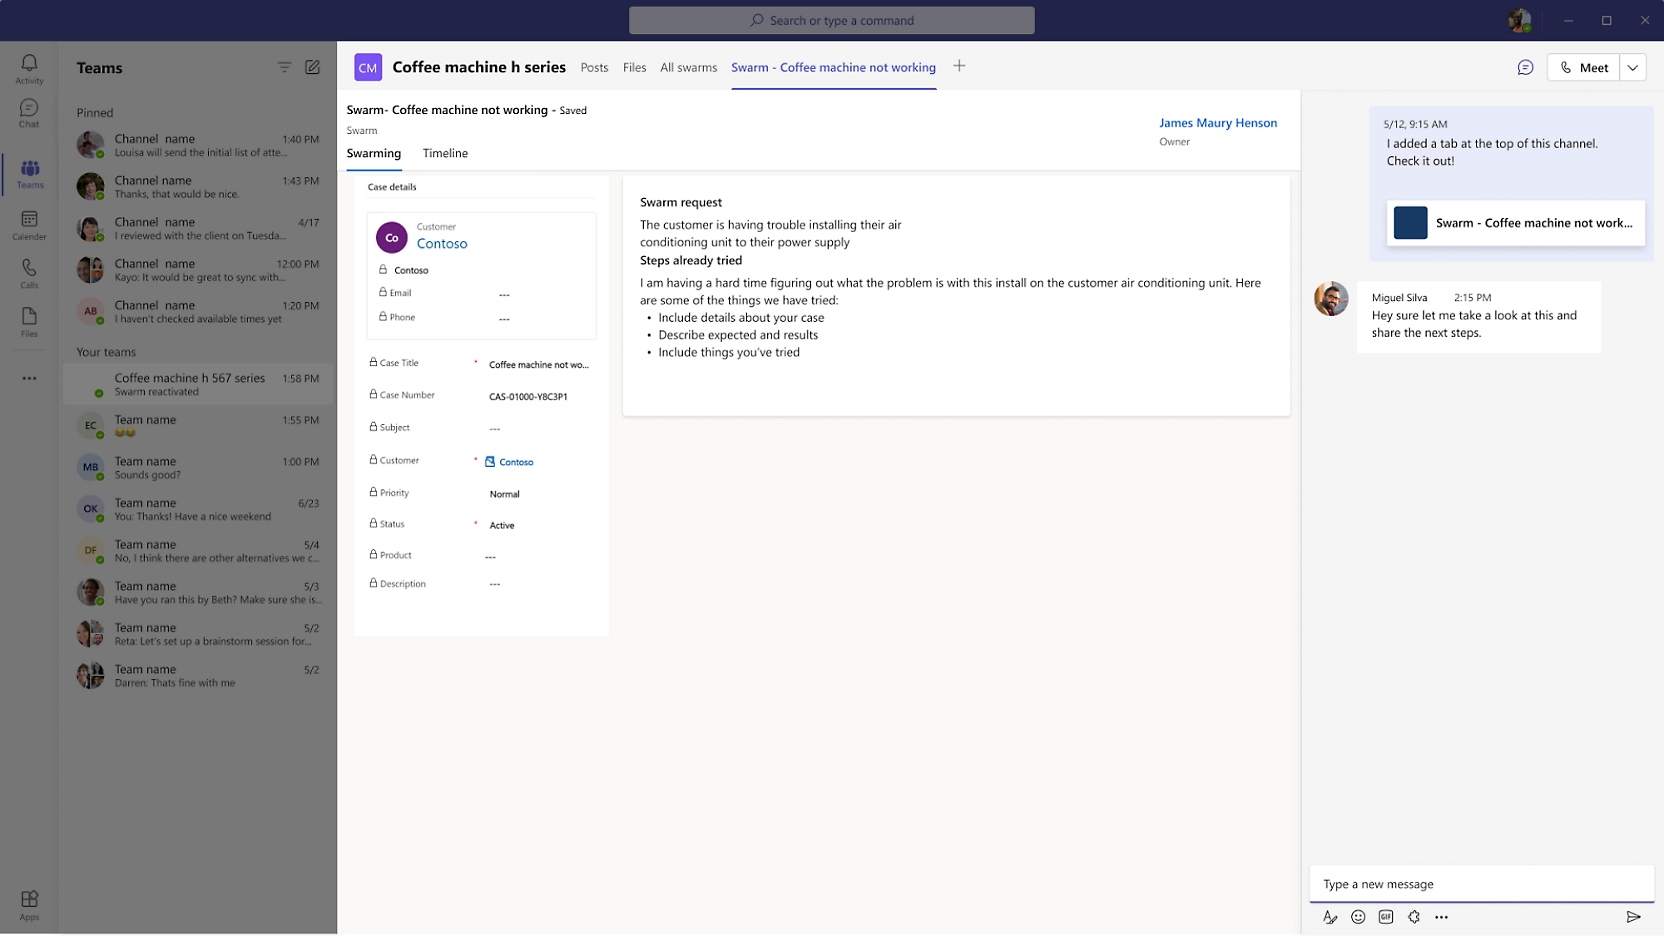 A screen shot of the Microsoft team chat app.